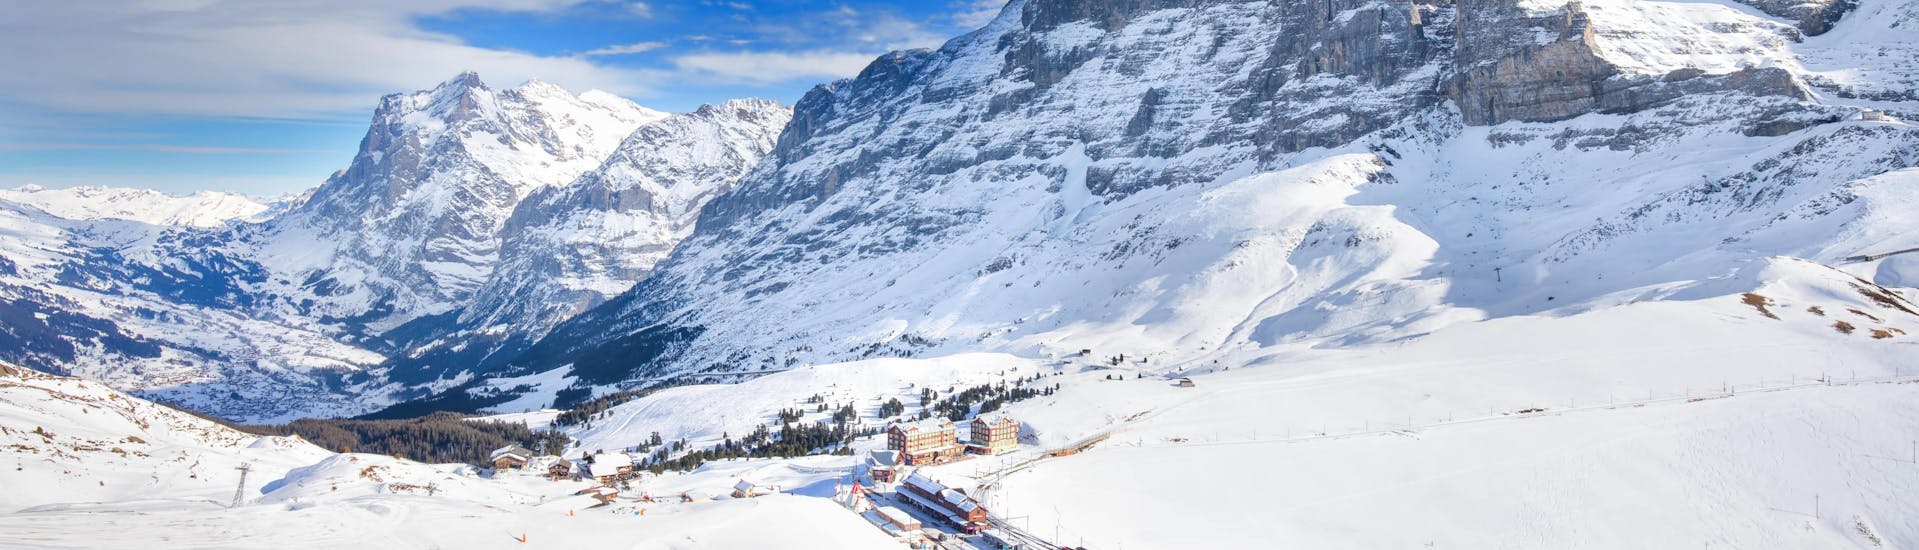 View of the snowy slopes of Grindelwald in the Jungfrau region, where many ski schools offer their ski lessons.